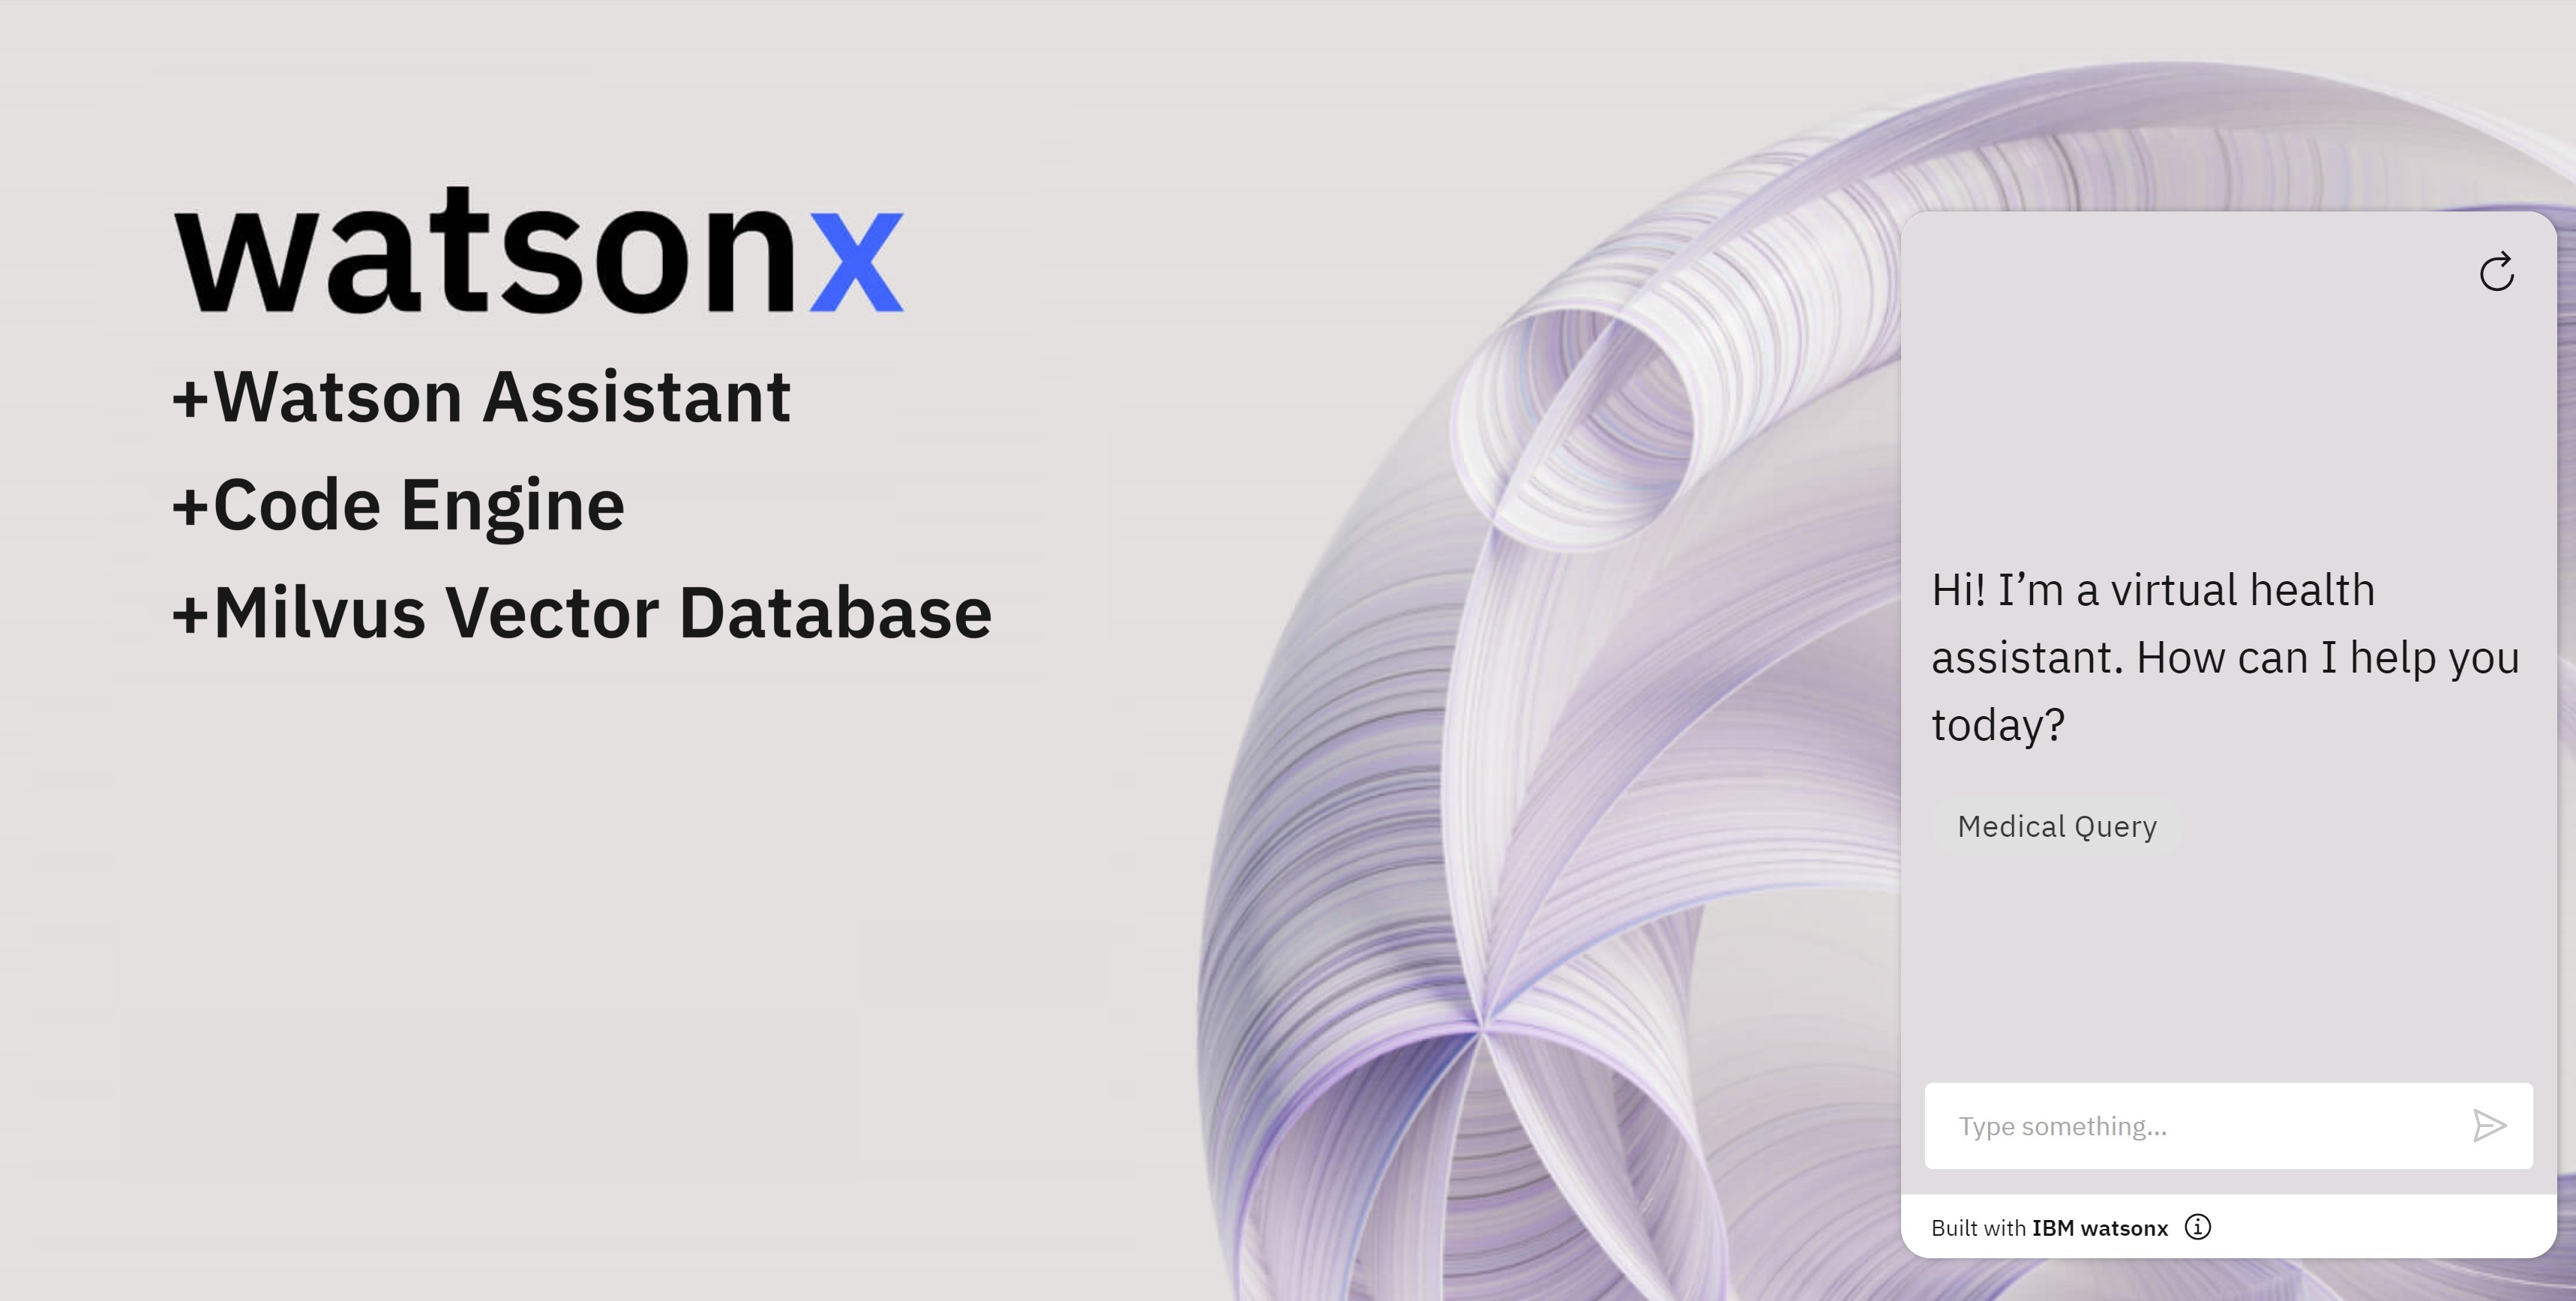 Watsonx Assistant with Milvus as Vector Database